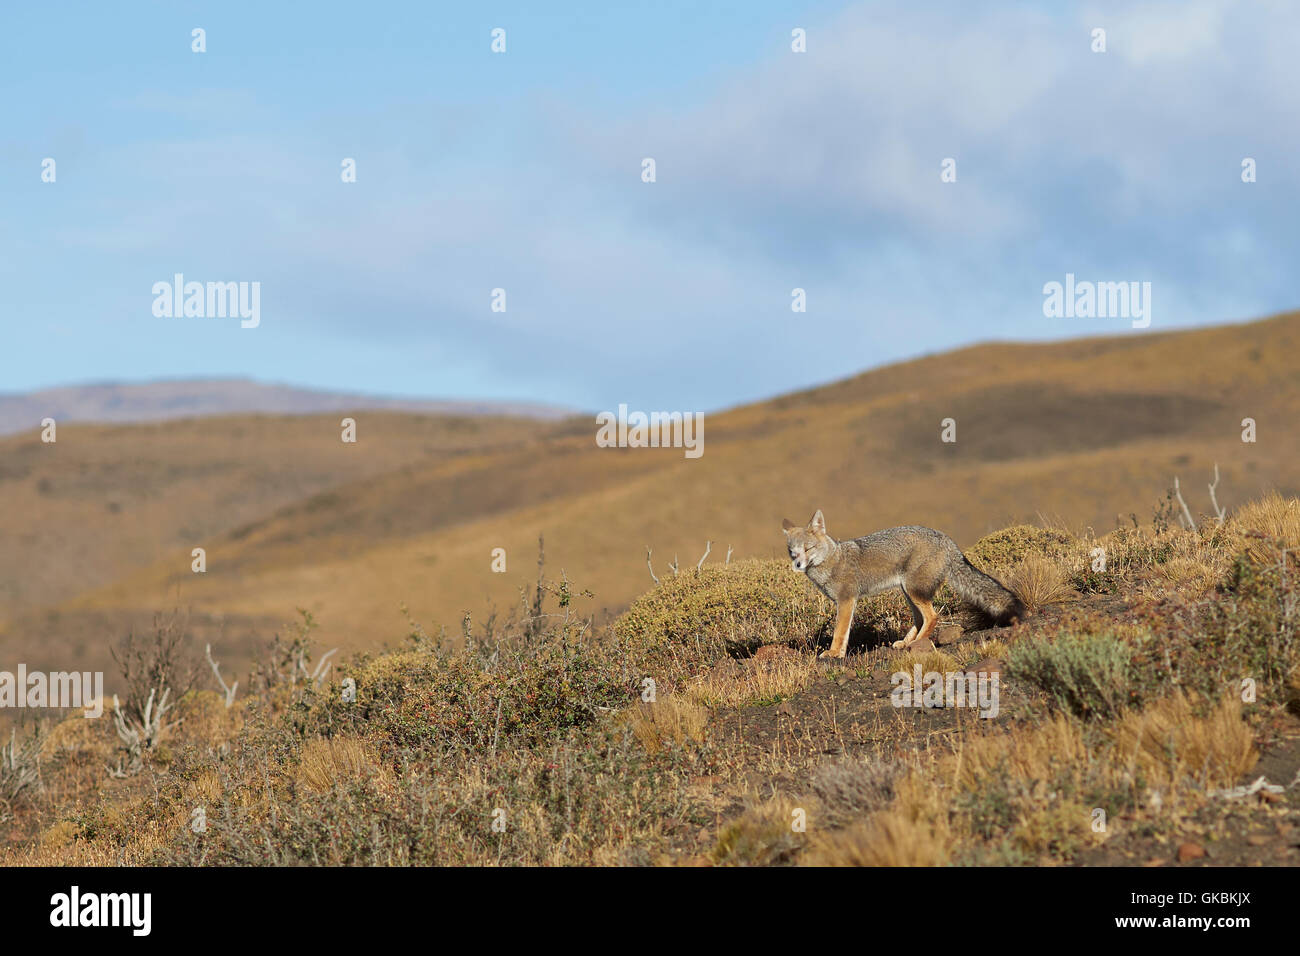 South American Grey Fox (Lycalopex fulvipes) Stock Photo